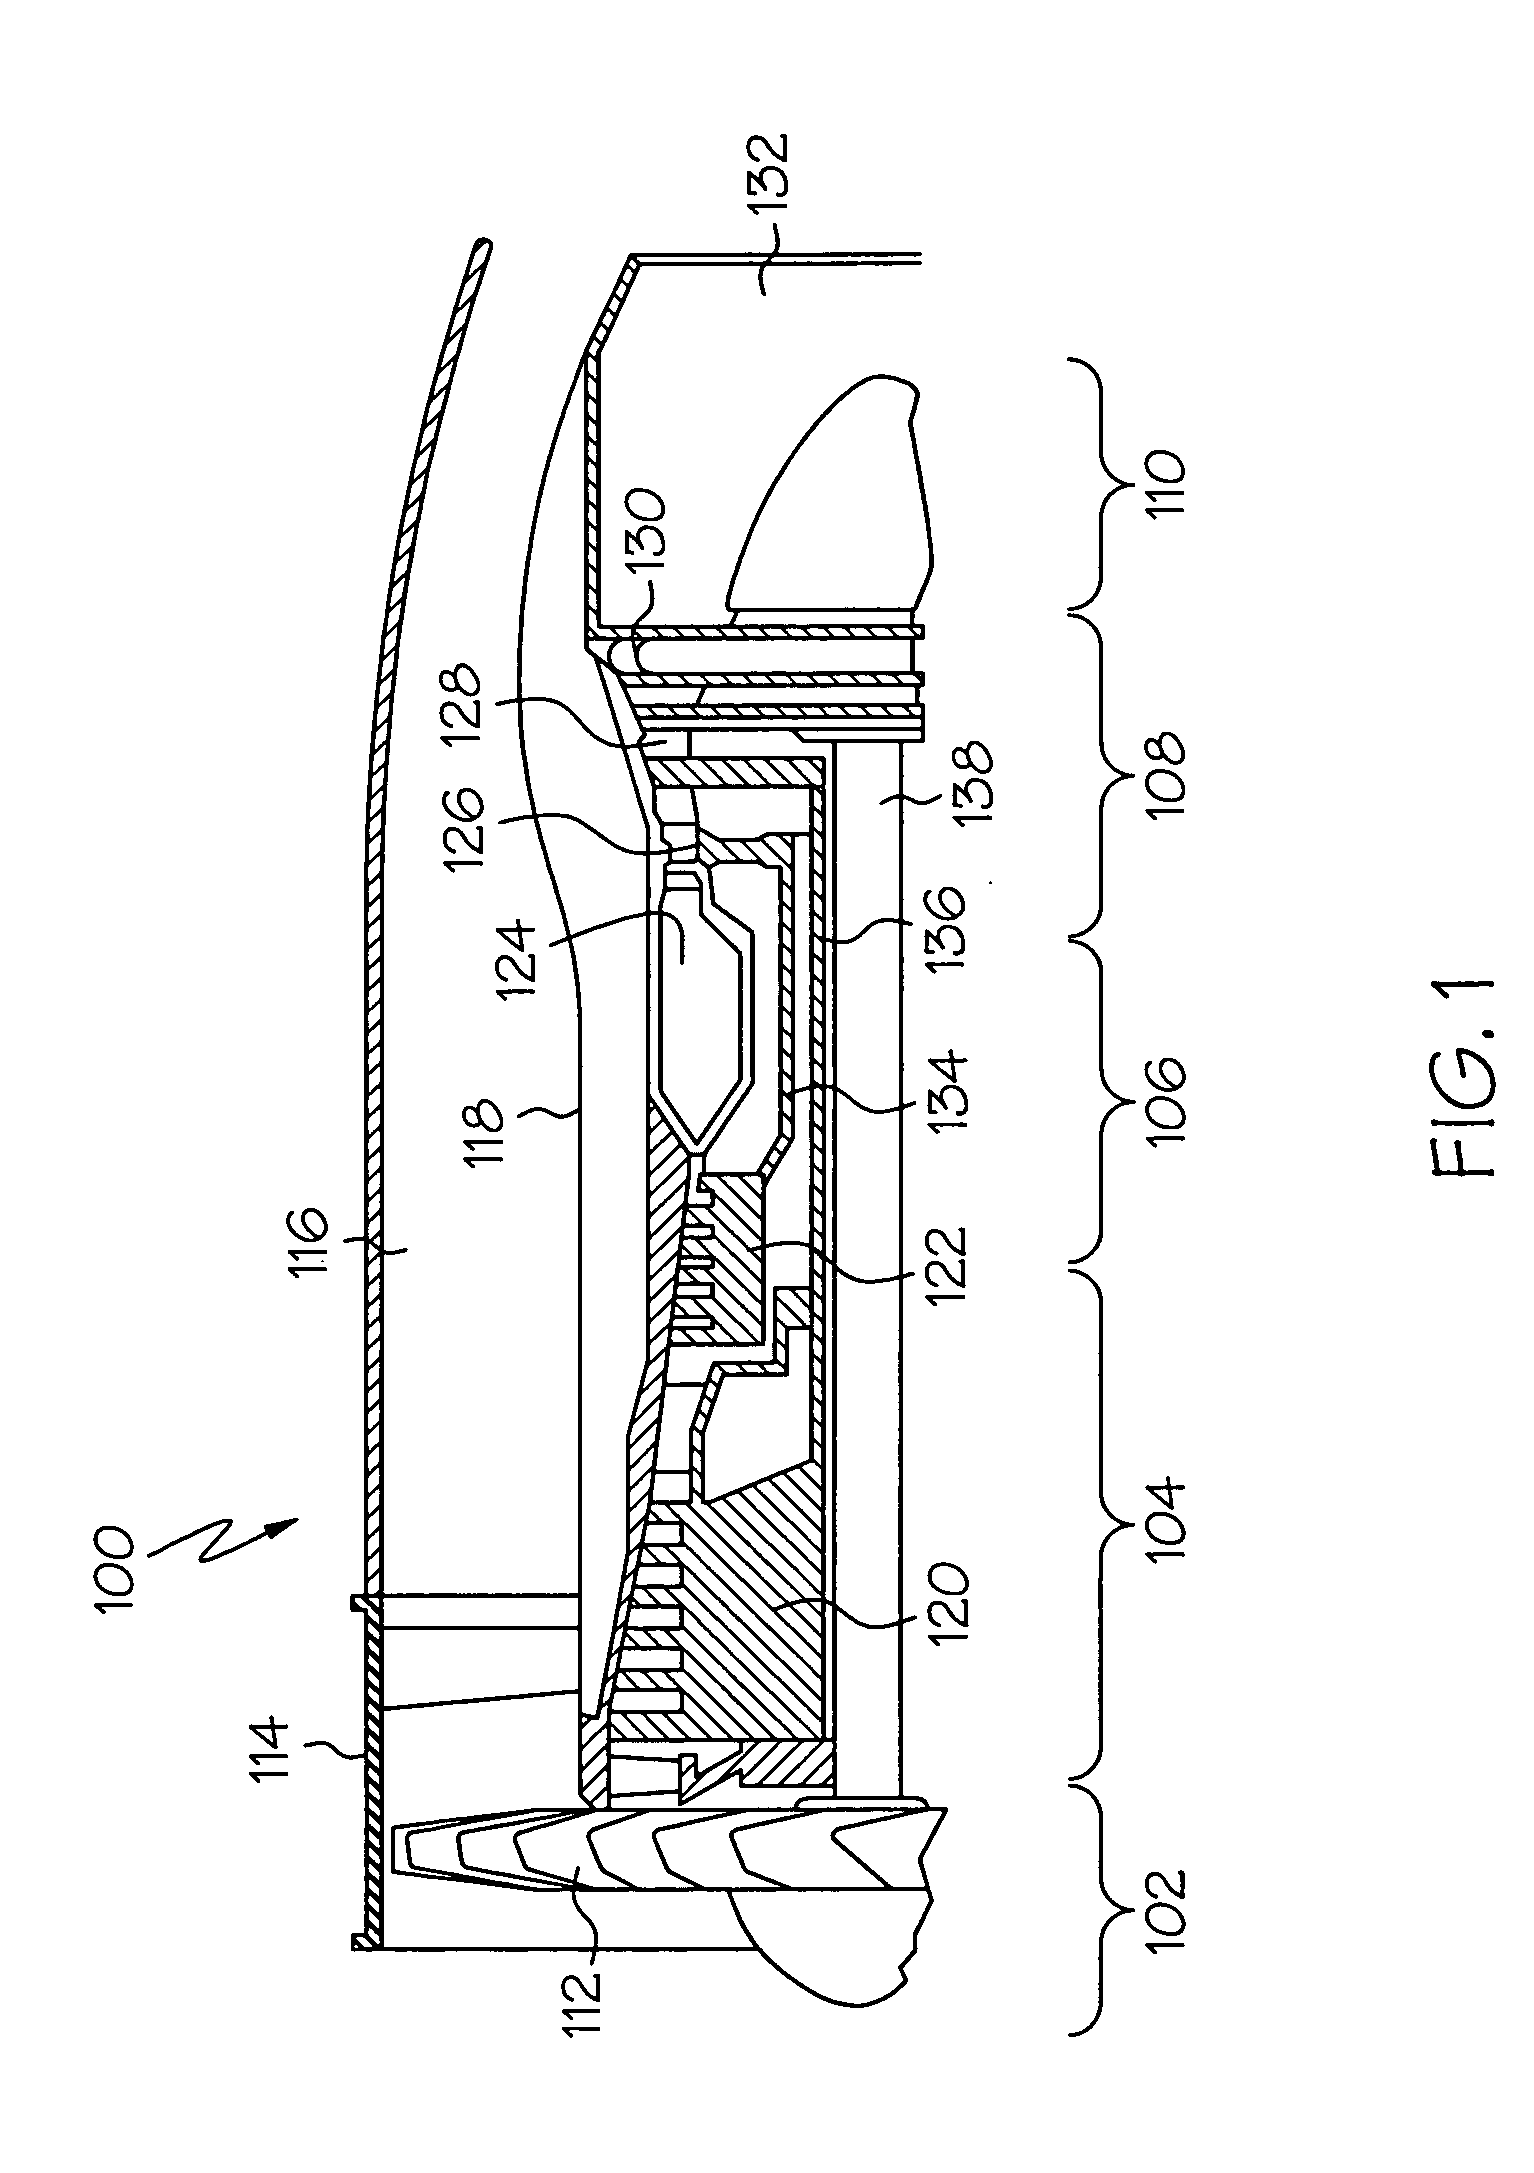 Reduced exhaust emissions gas turbine engine combustor